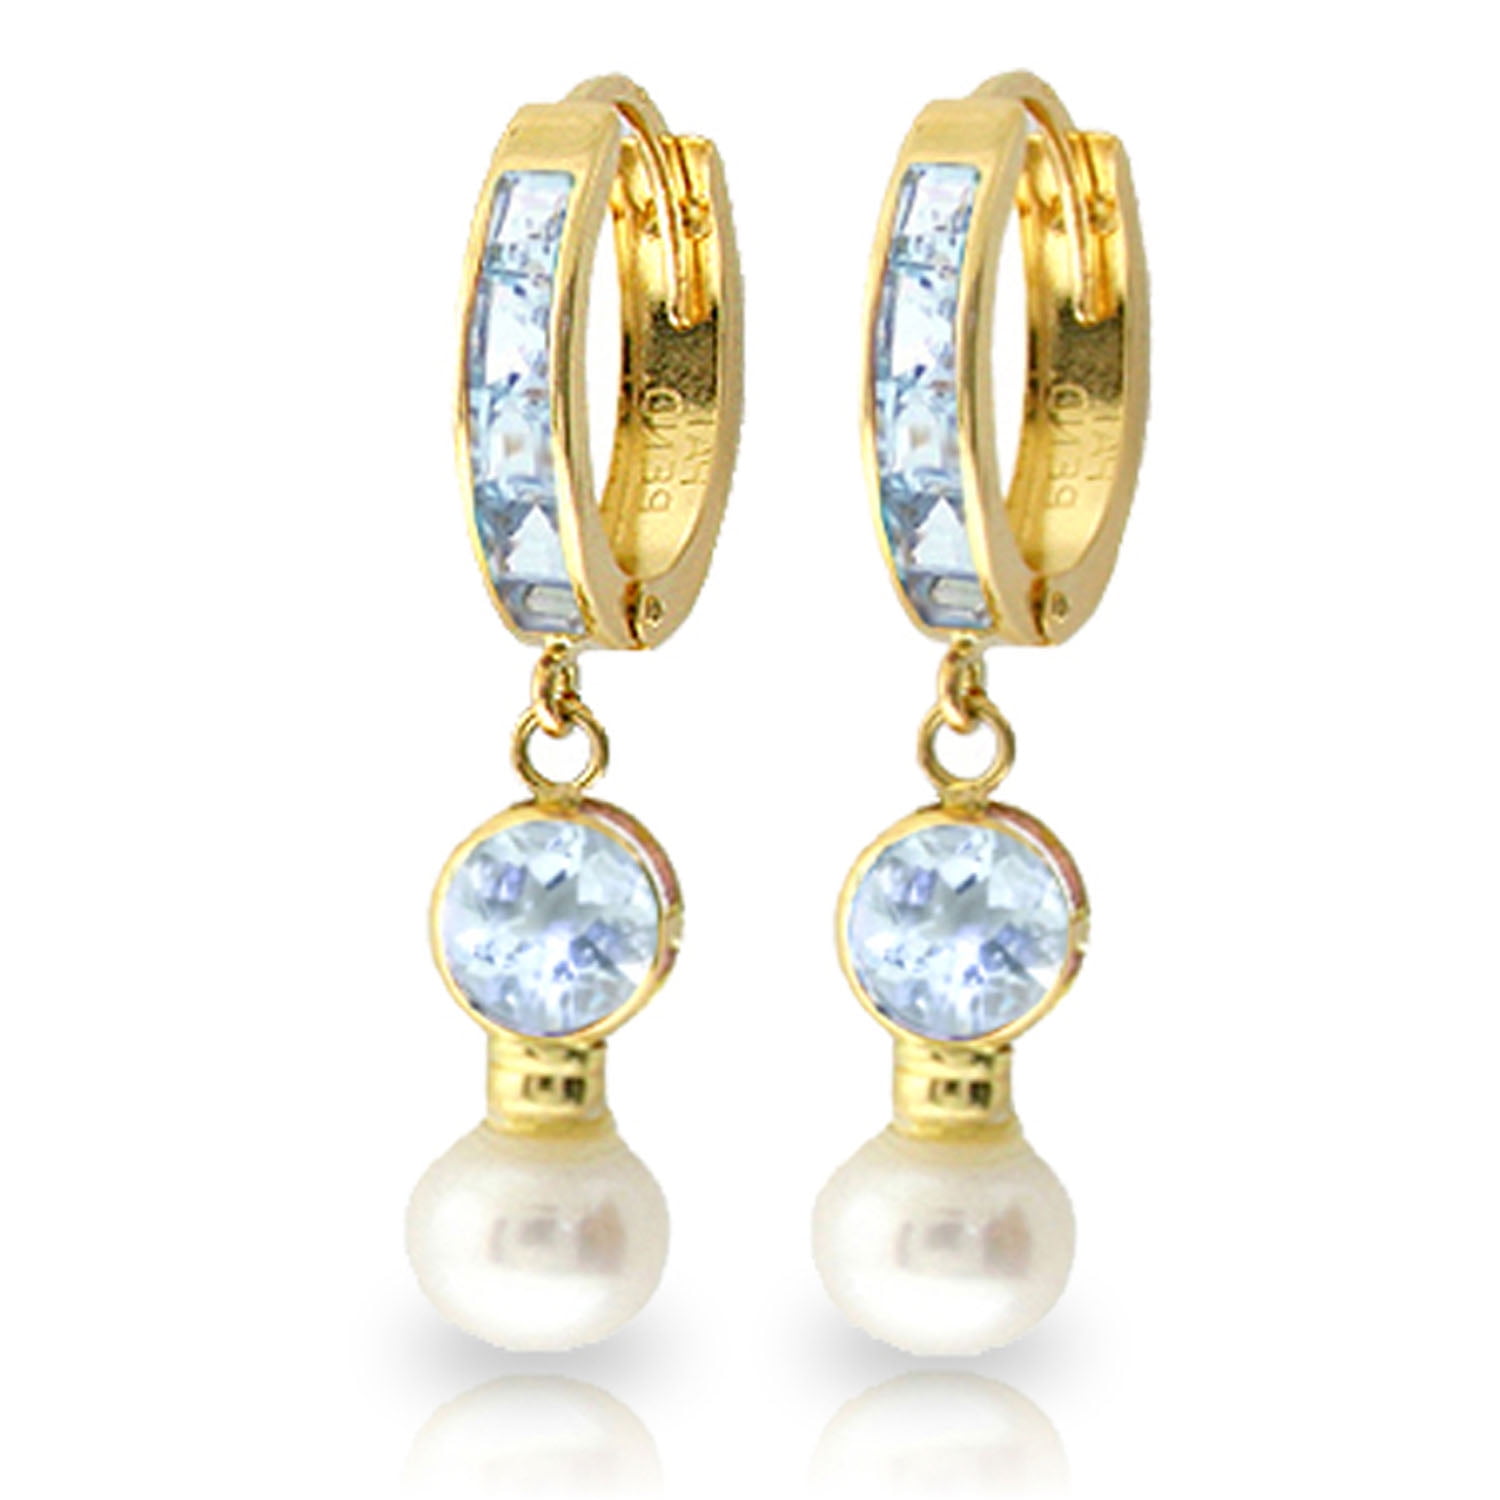 Galaxy Gold GG 14k Yellow Gold Dangle Earrings with Freshwater-cultured Pearl and Aquamarine